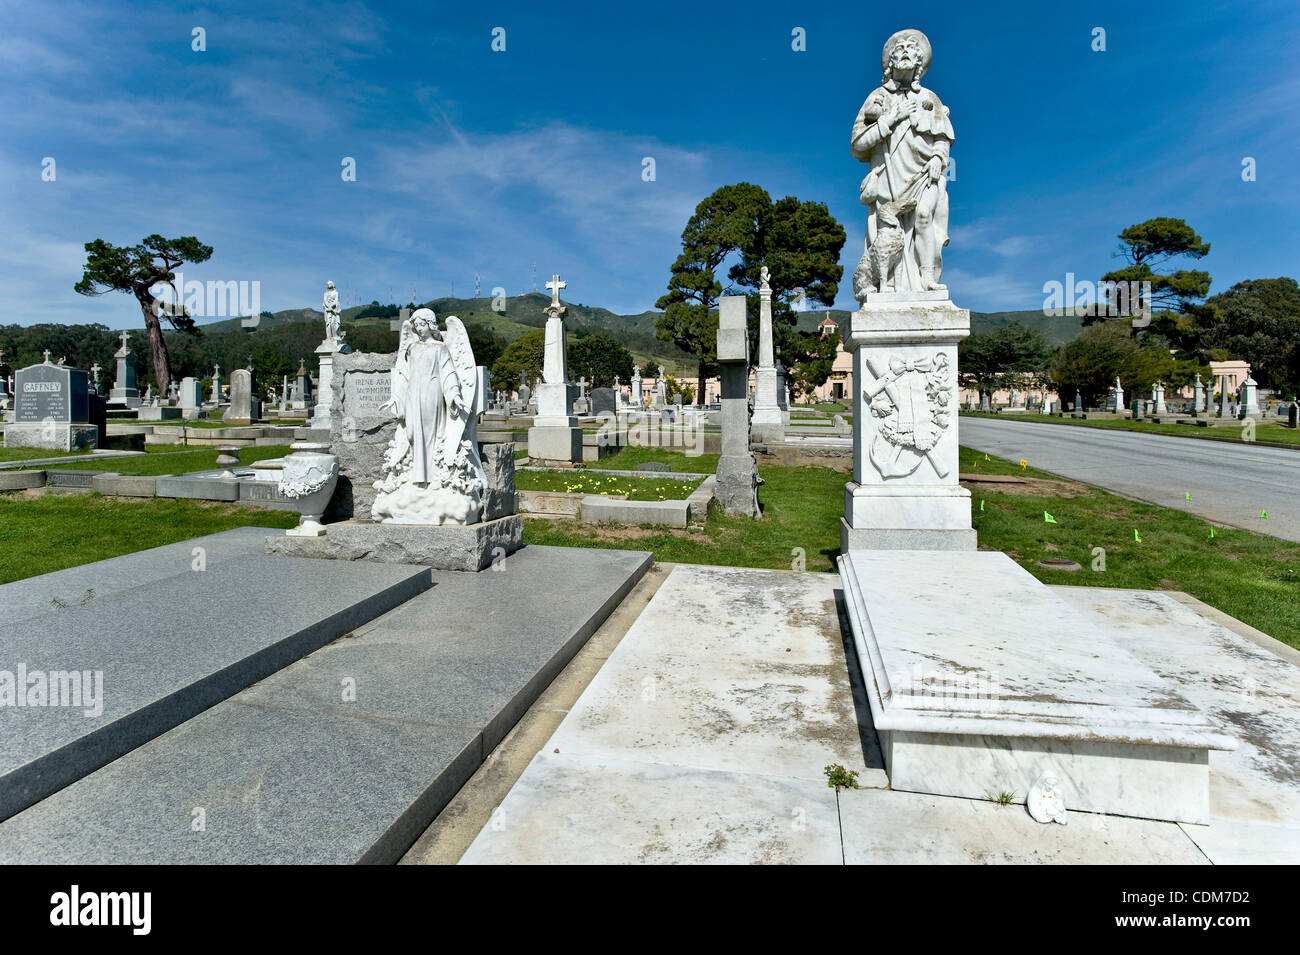 Apr.1, 2011 - Colma, California, USA -  Established as a 2.25 square mile necropolis in 1924, a place where San Franciscans could bury their dead, the city of Colma, California, whose city motto is 'It's Great To Be Alive In Colma!,' is currently home to 1,593 above ground residents and 1.5 million  Stock Photo